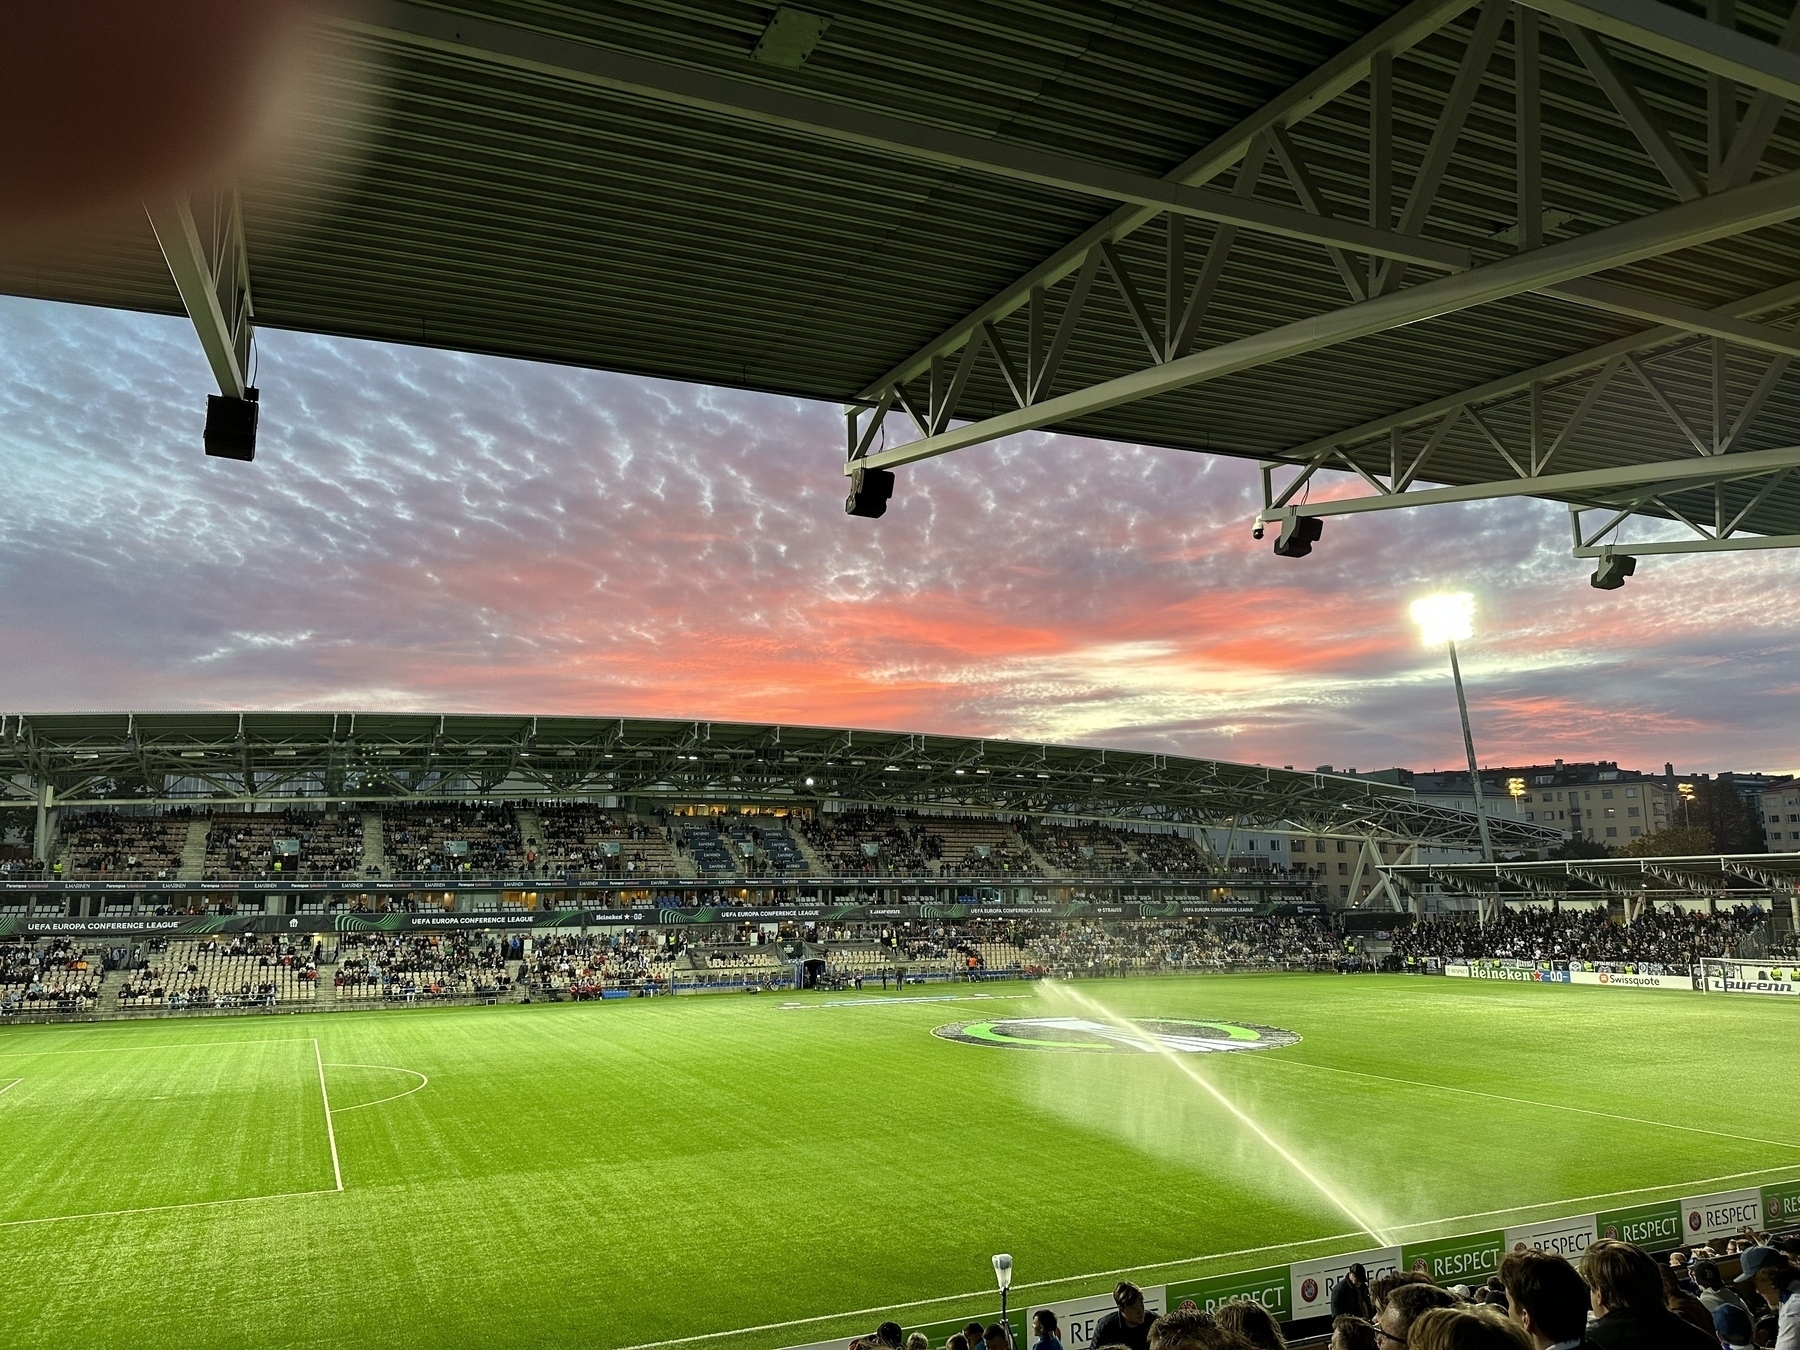 Football stadium, clouds reflecting the red of the setting sun. Bright green football pitch being sprayed with a stream of water from a jet